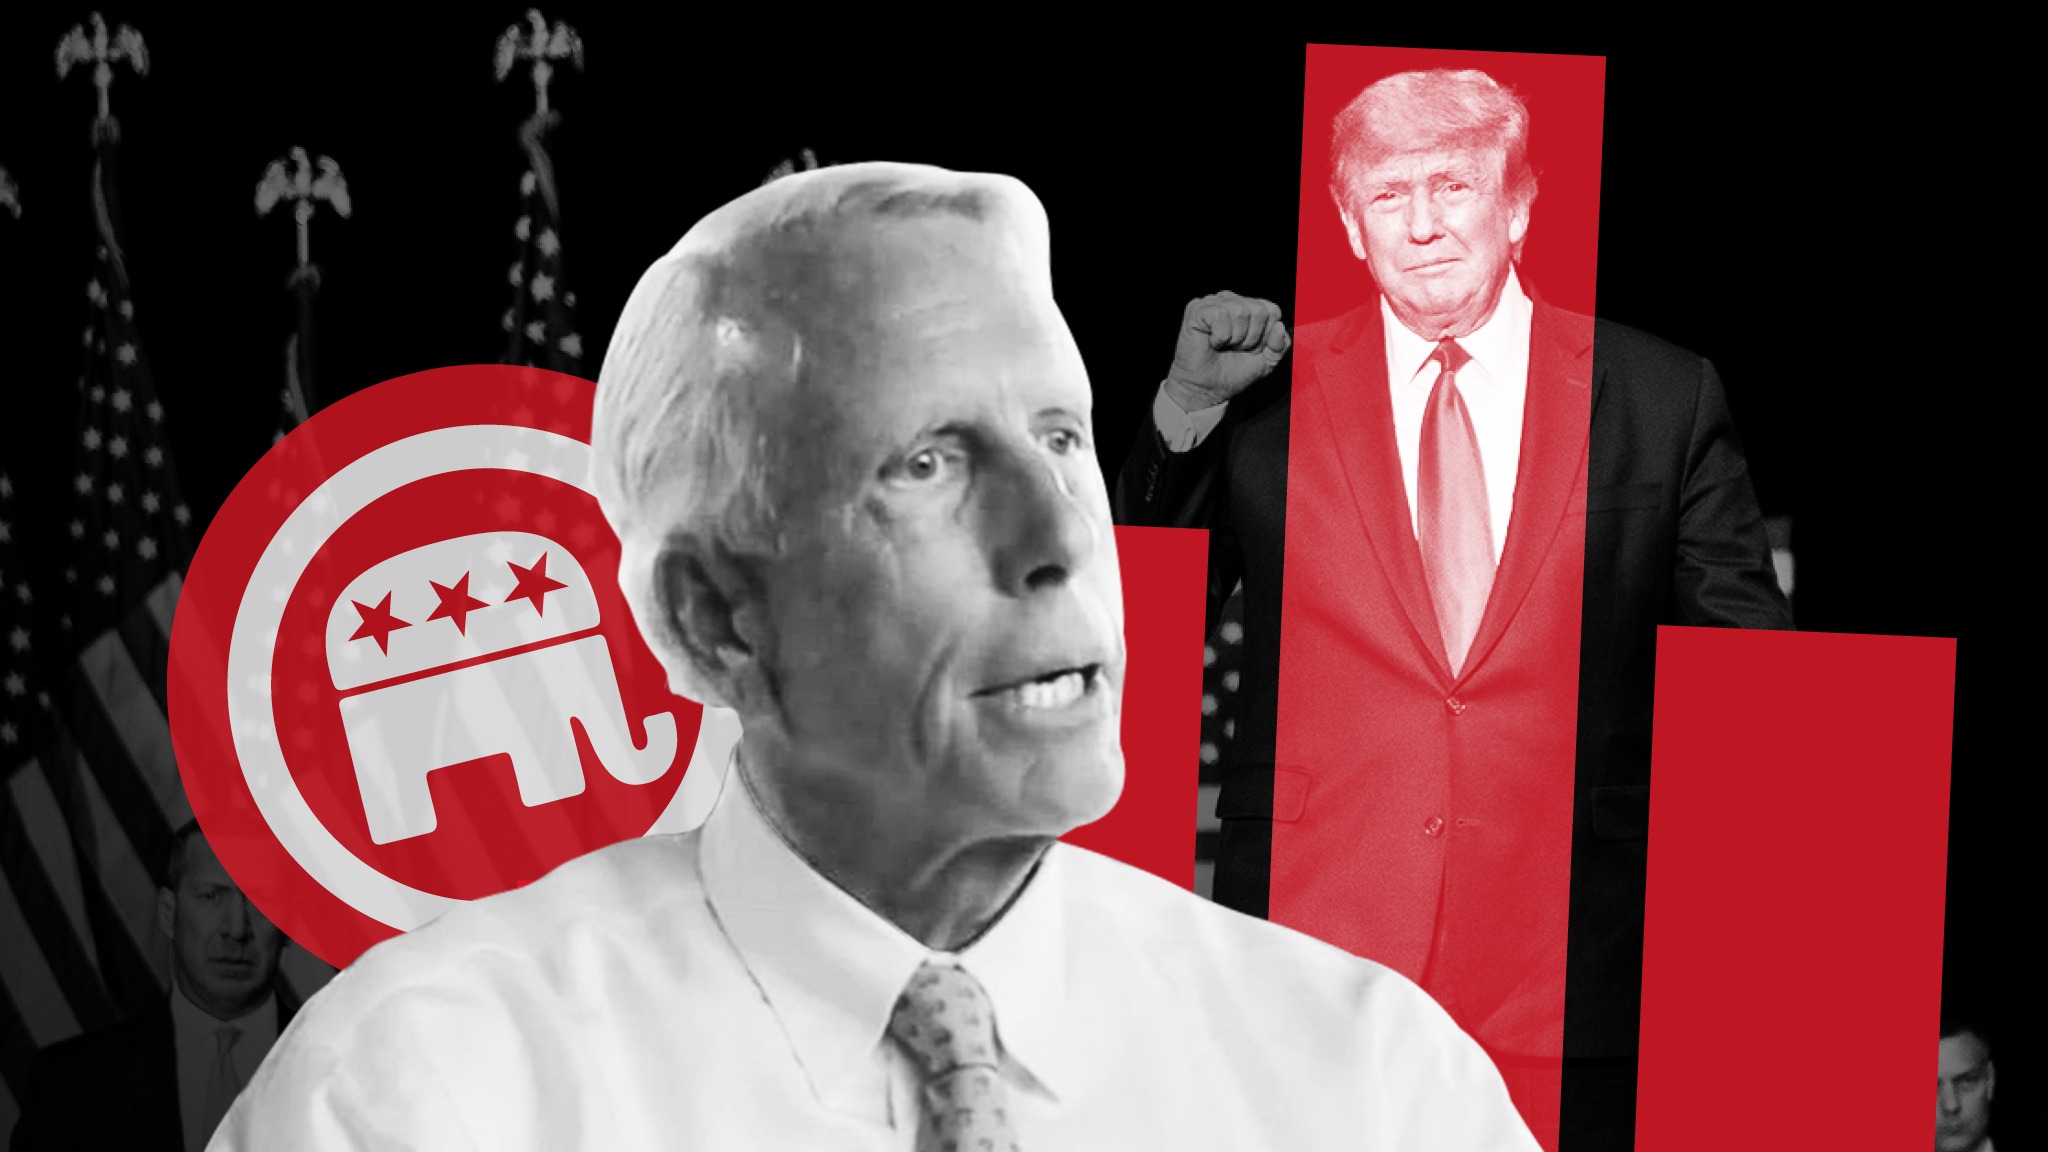 How Richard Uihlein became one of the GOP's biggest megadonors